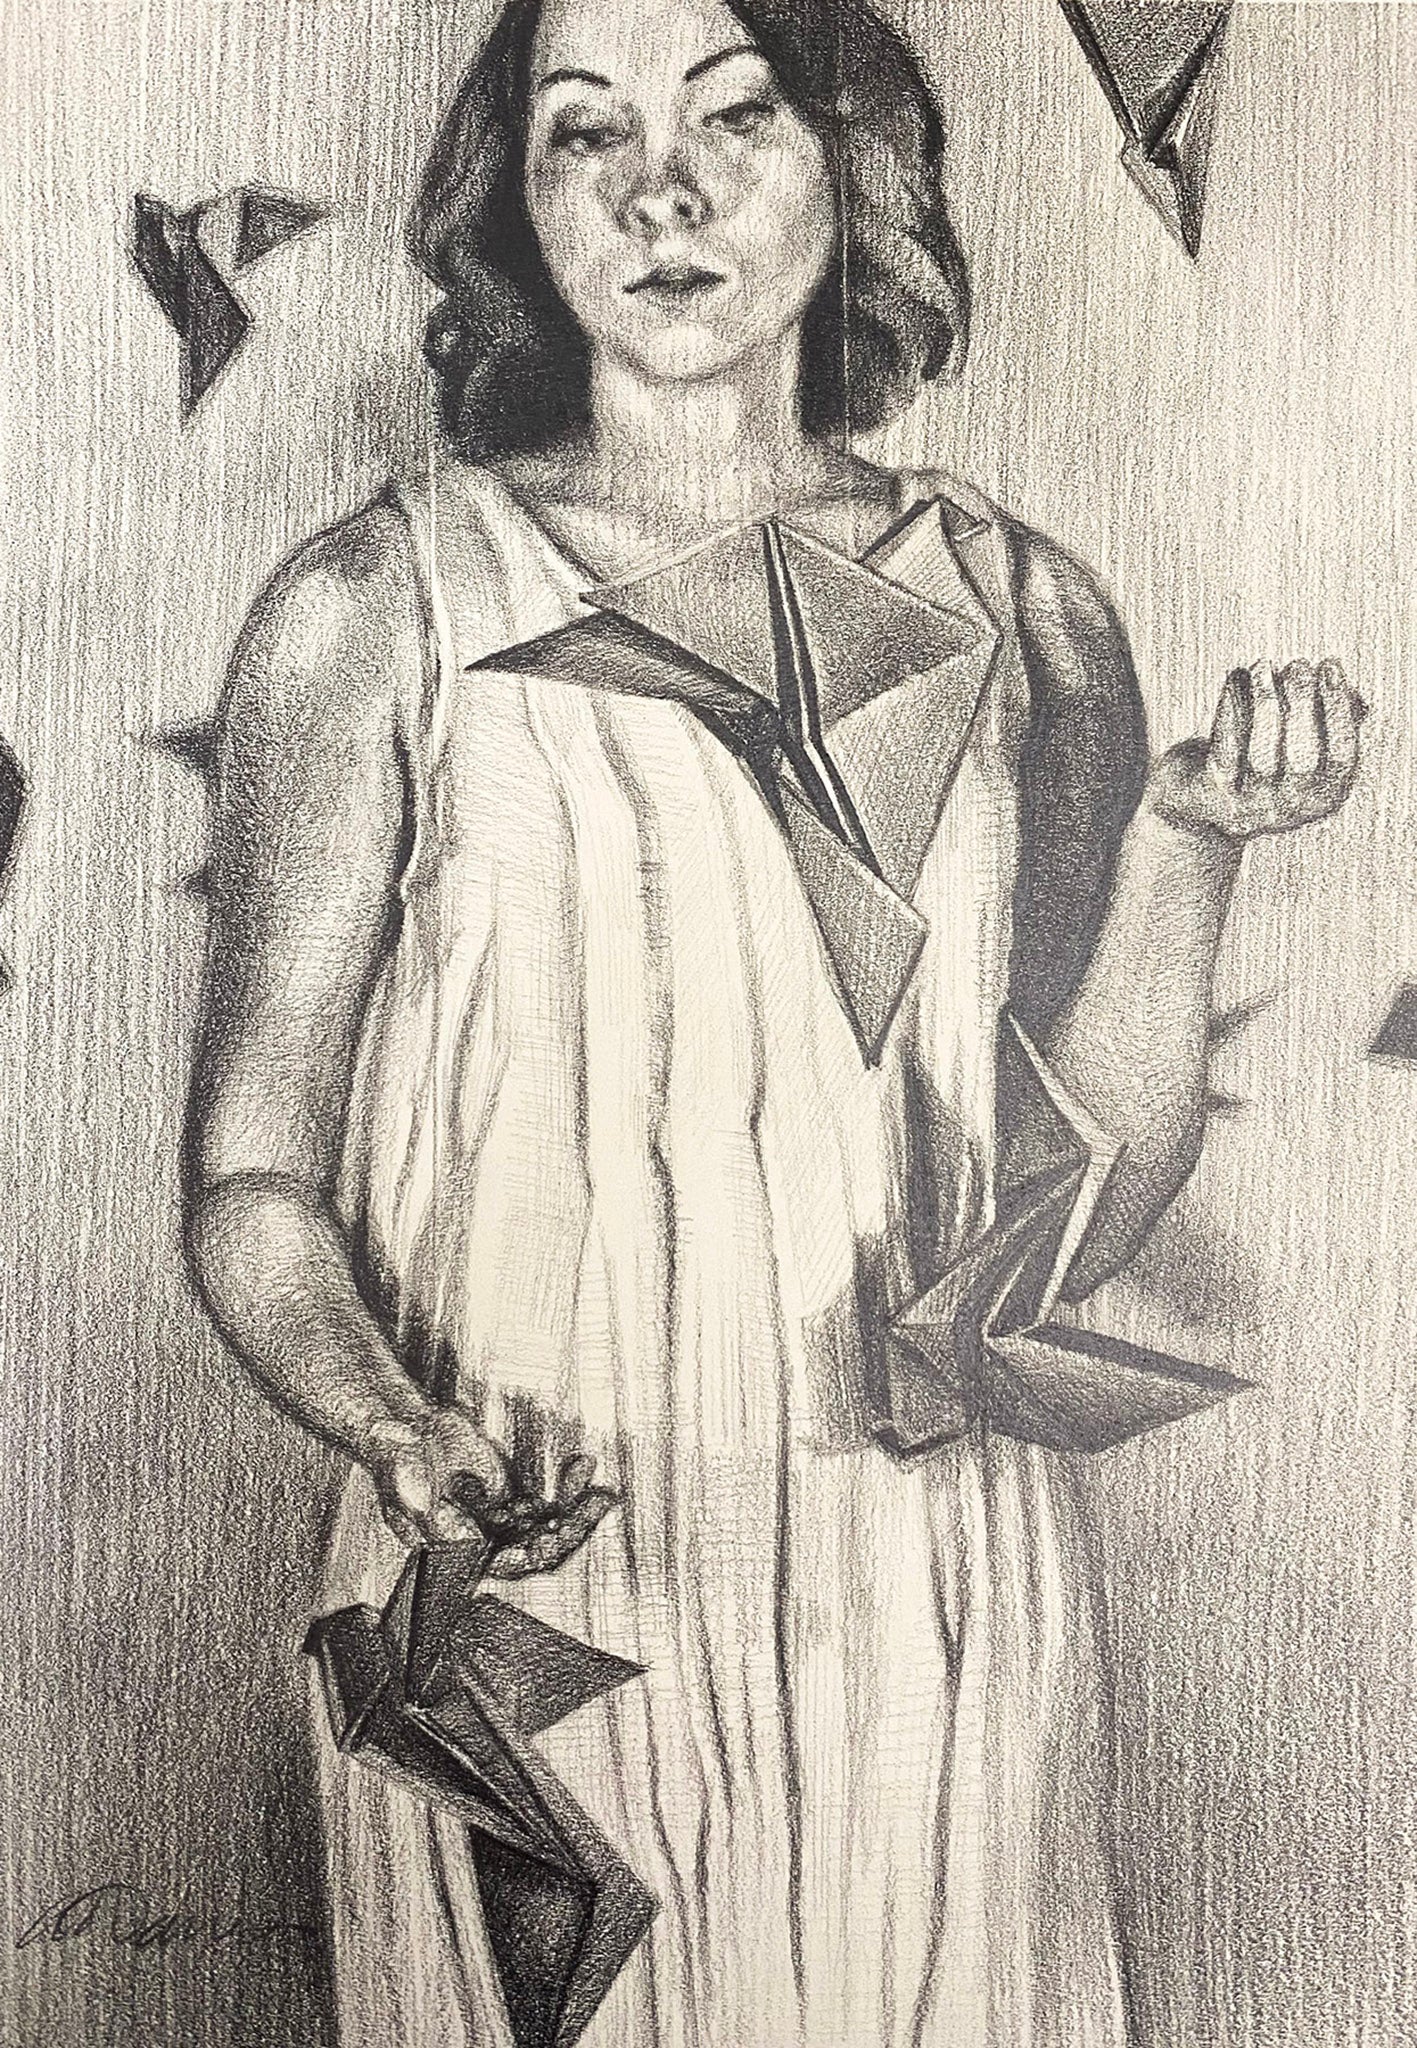 Graphite drawing of a woman playing with paper cranes. 7"x10" (12.25"x15.25" framed) graphite on paper by April Dawes